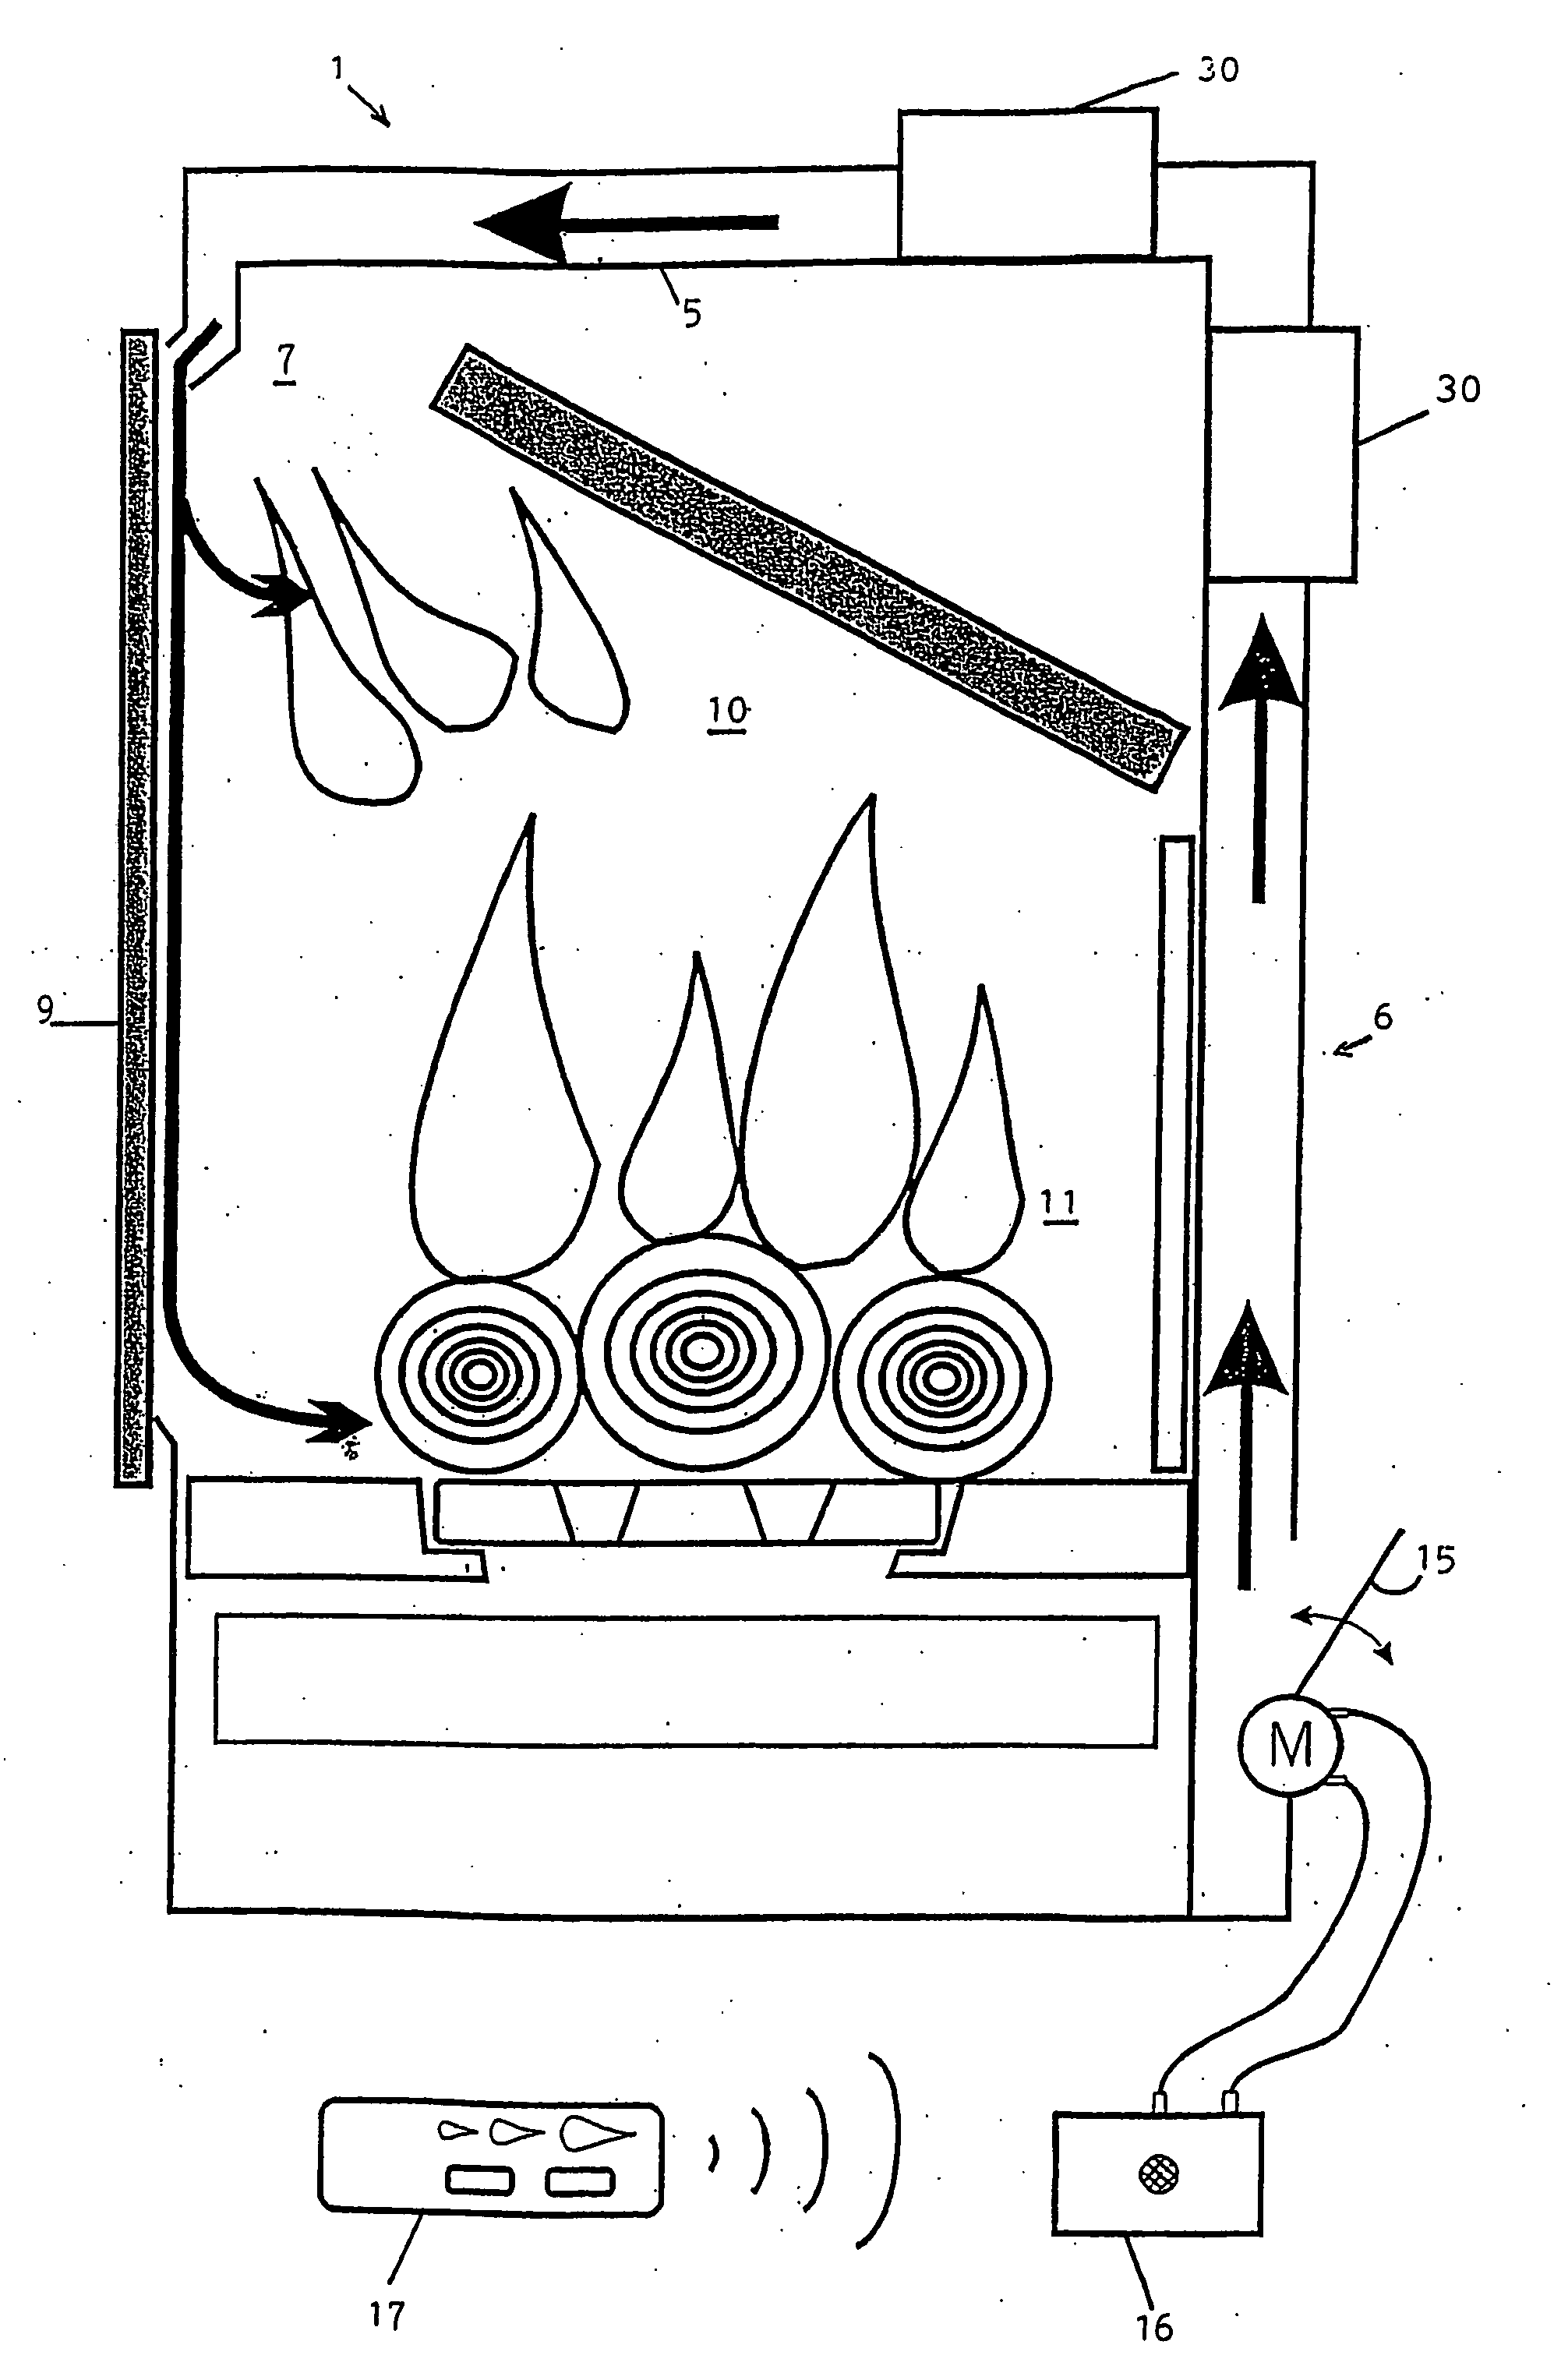 High output heating device